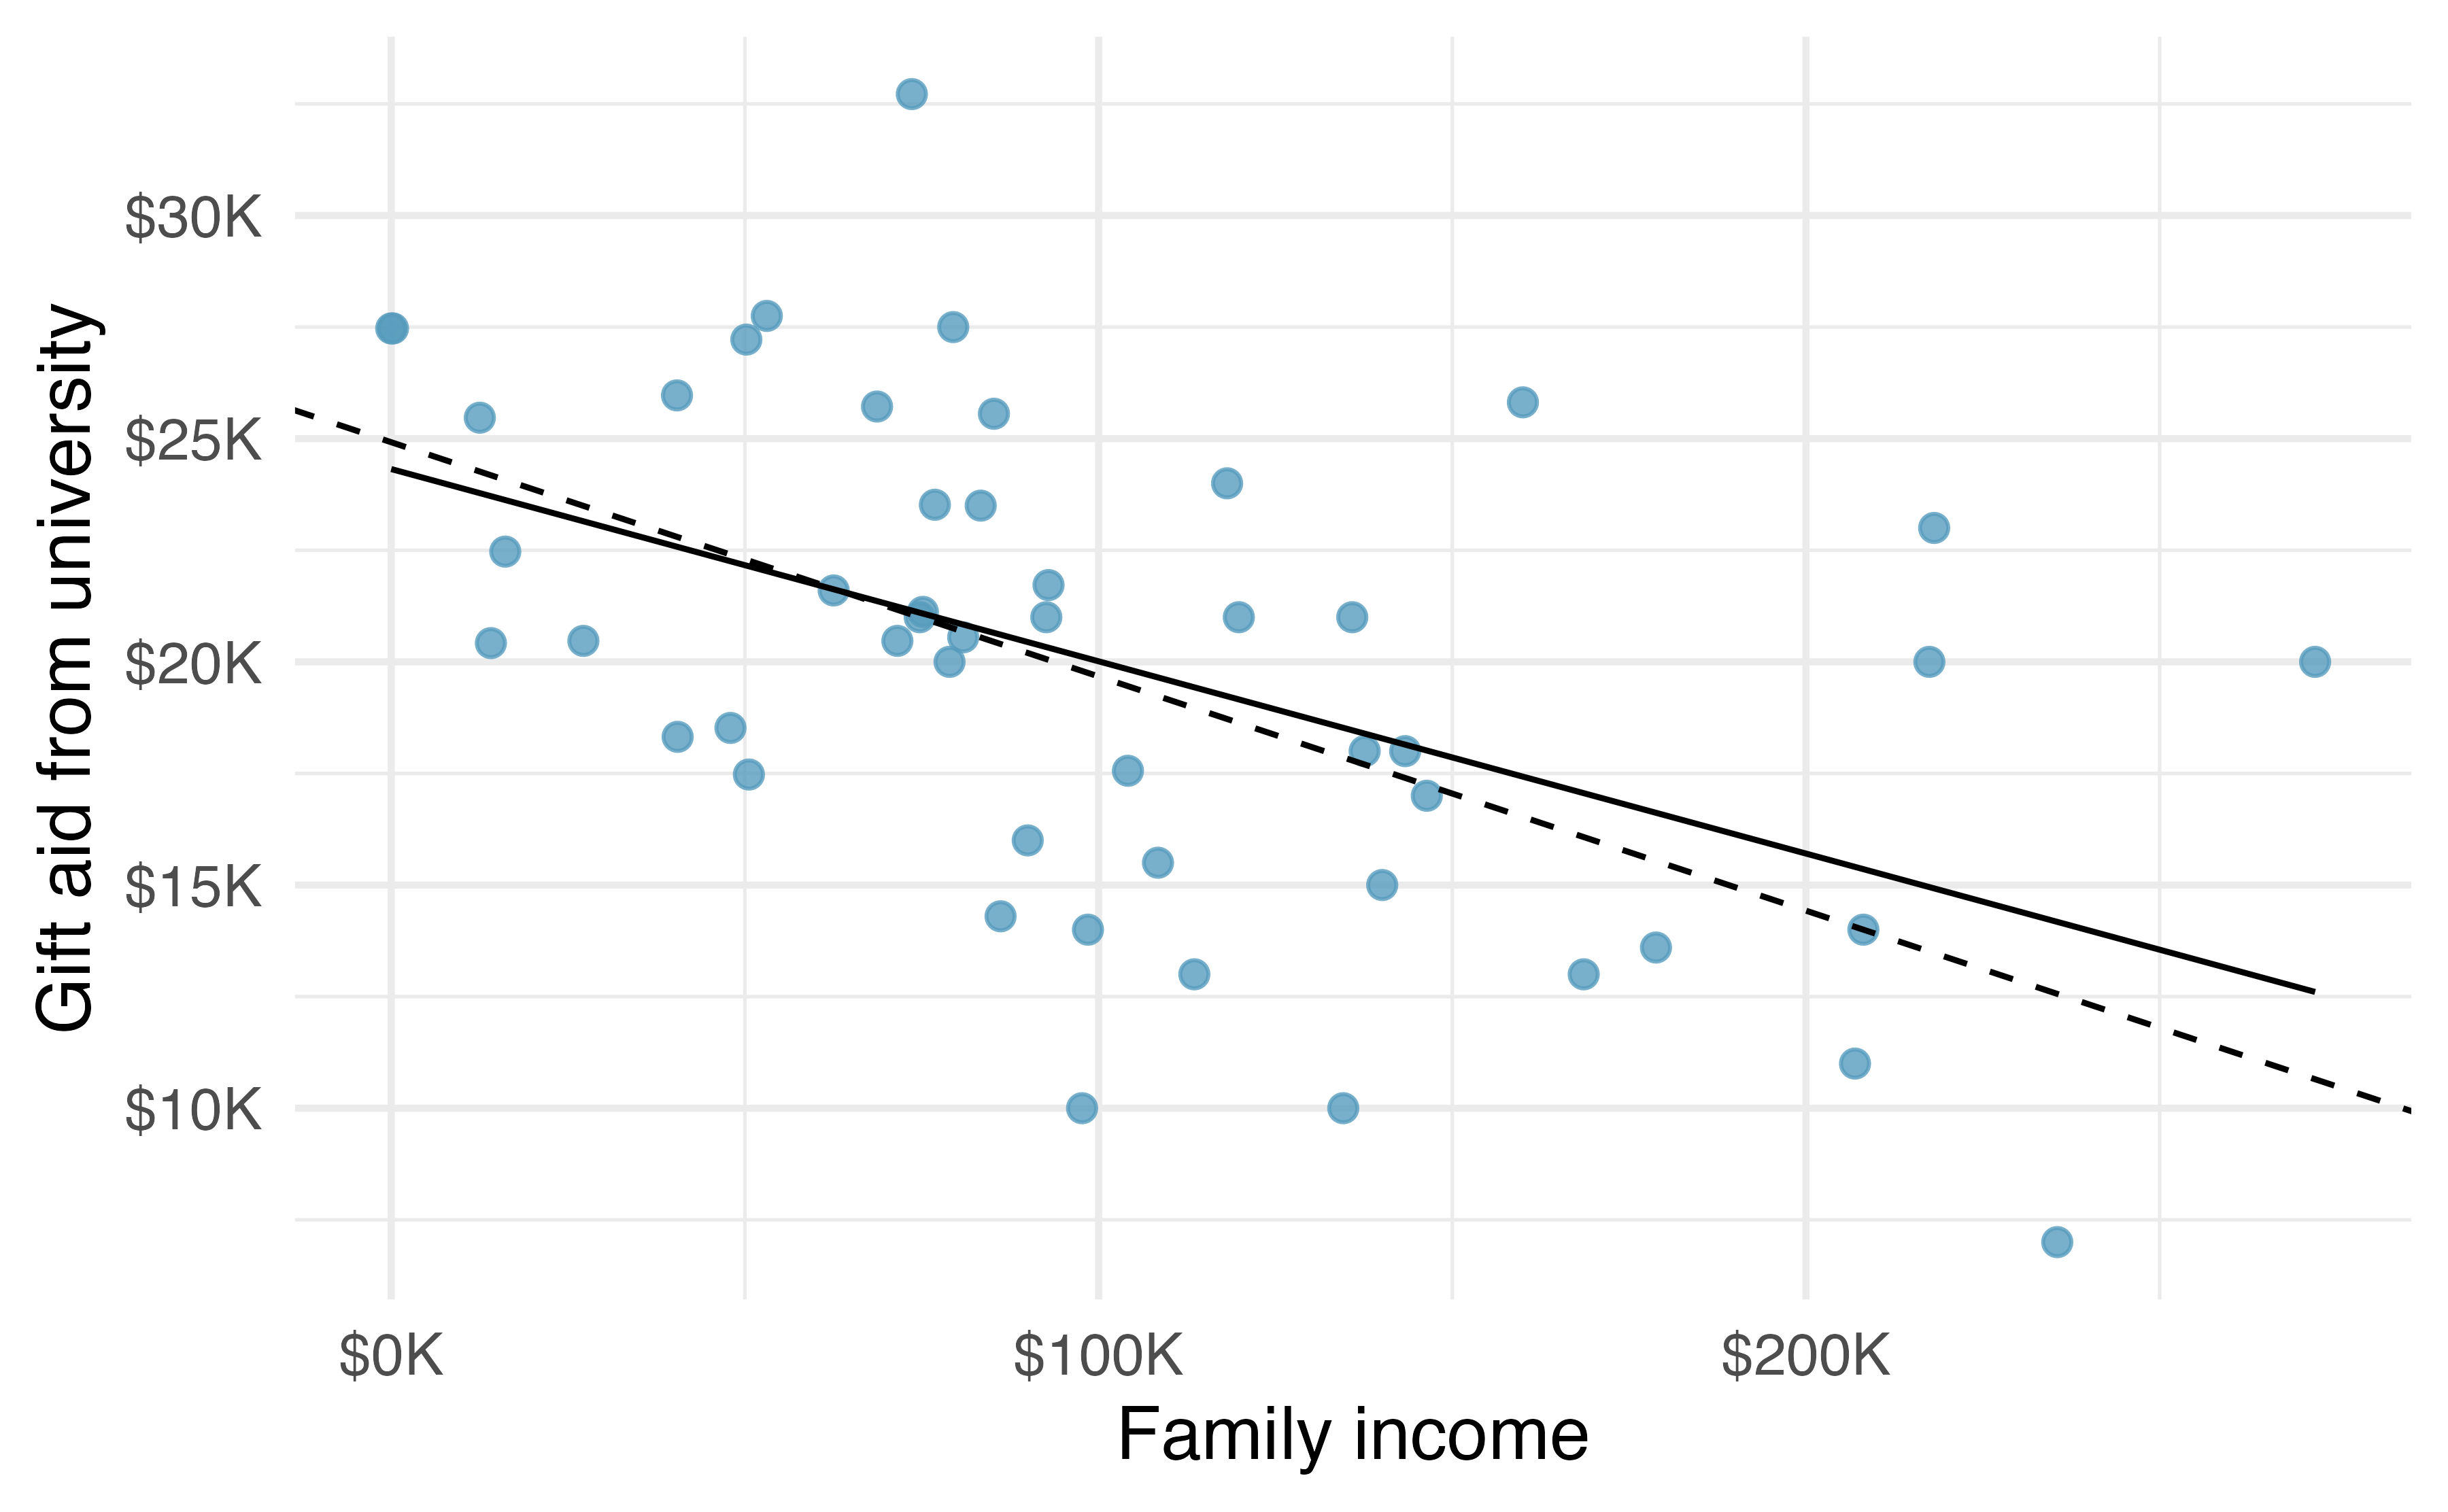 Gift aid and family income for a random sample of 50 freshman students from Elmhurst College, shown with the least squares line (solid line) and line fit by minimizing the sum of the residual magnitudes (dashed line).